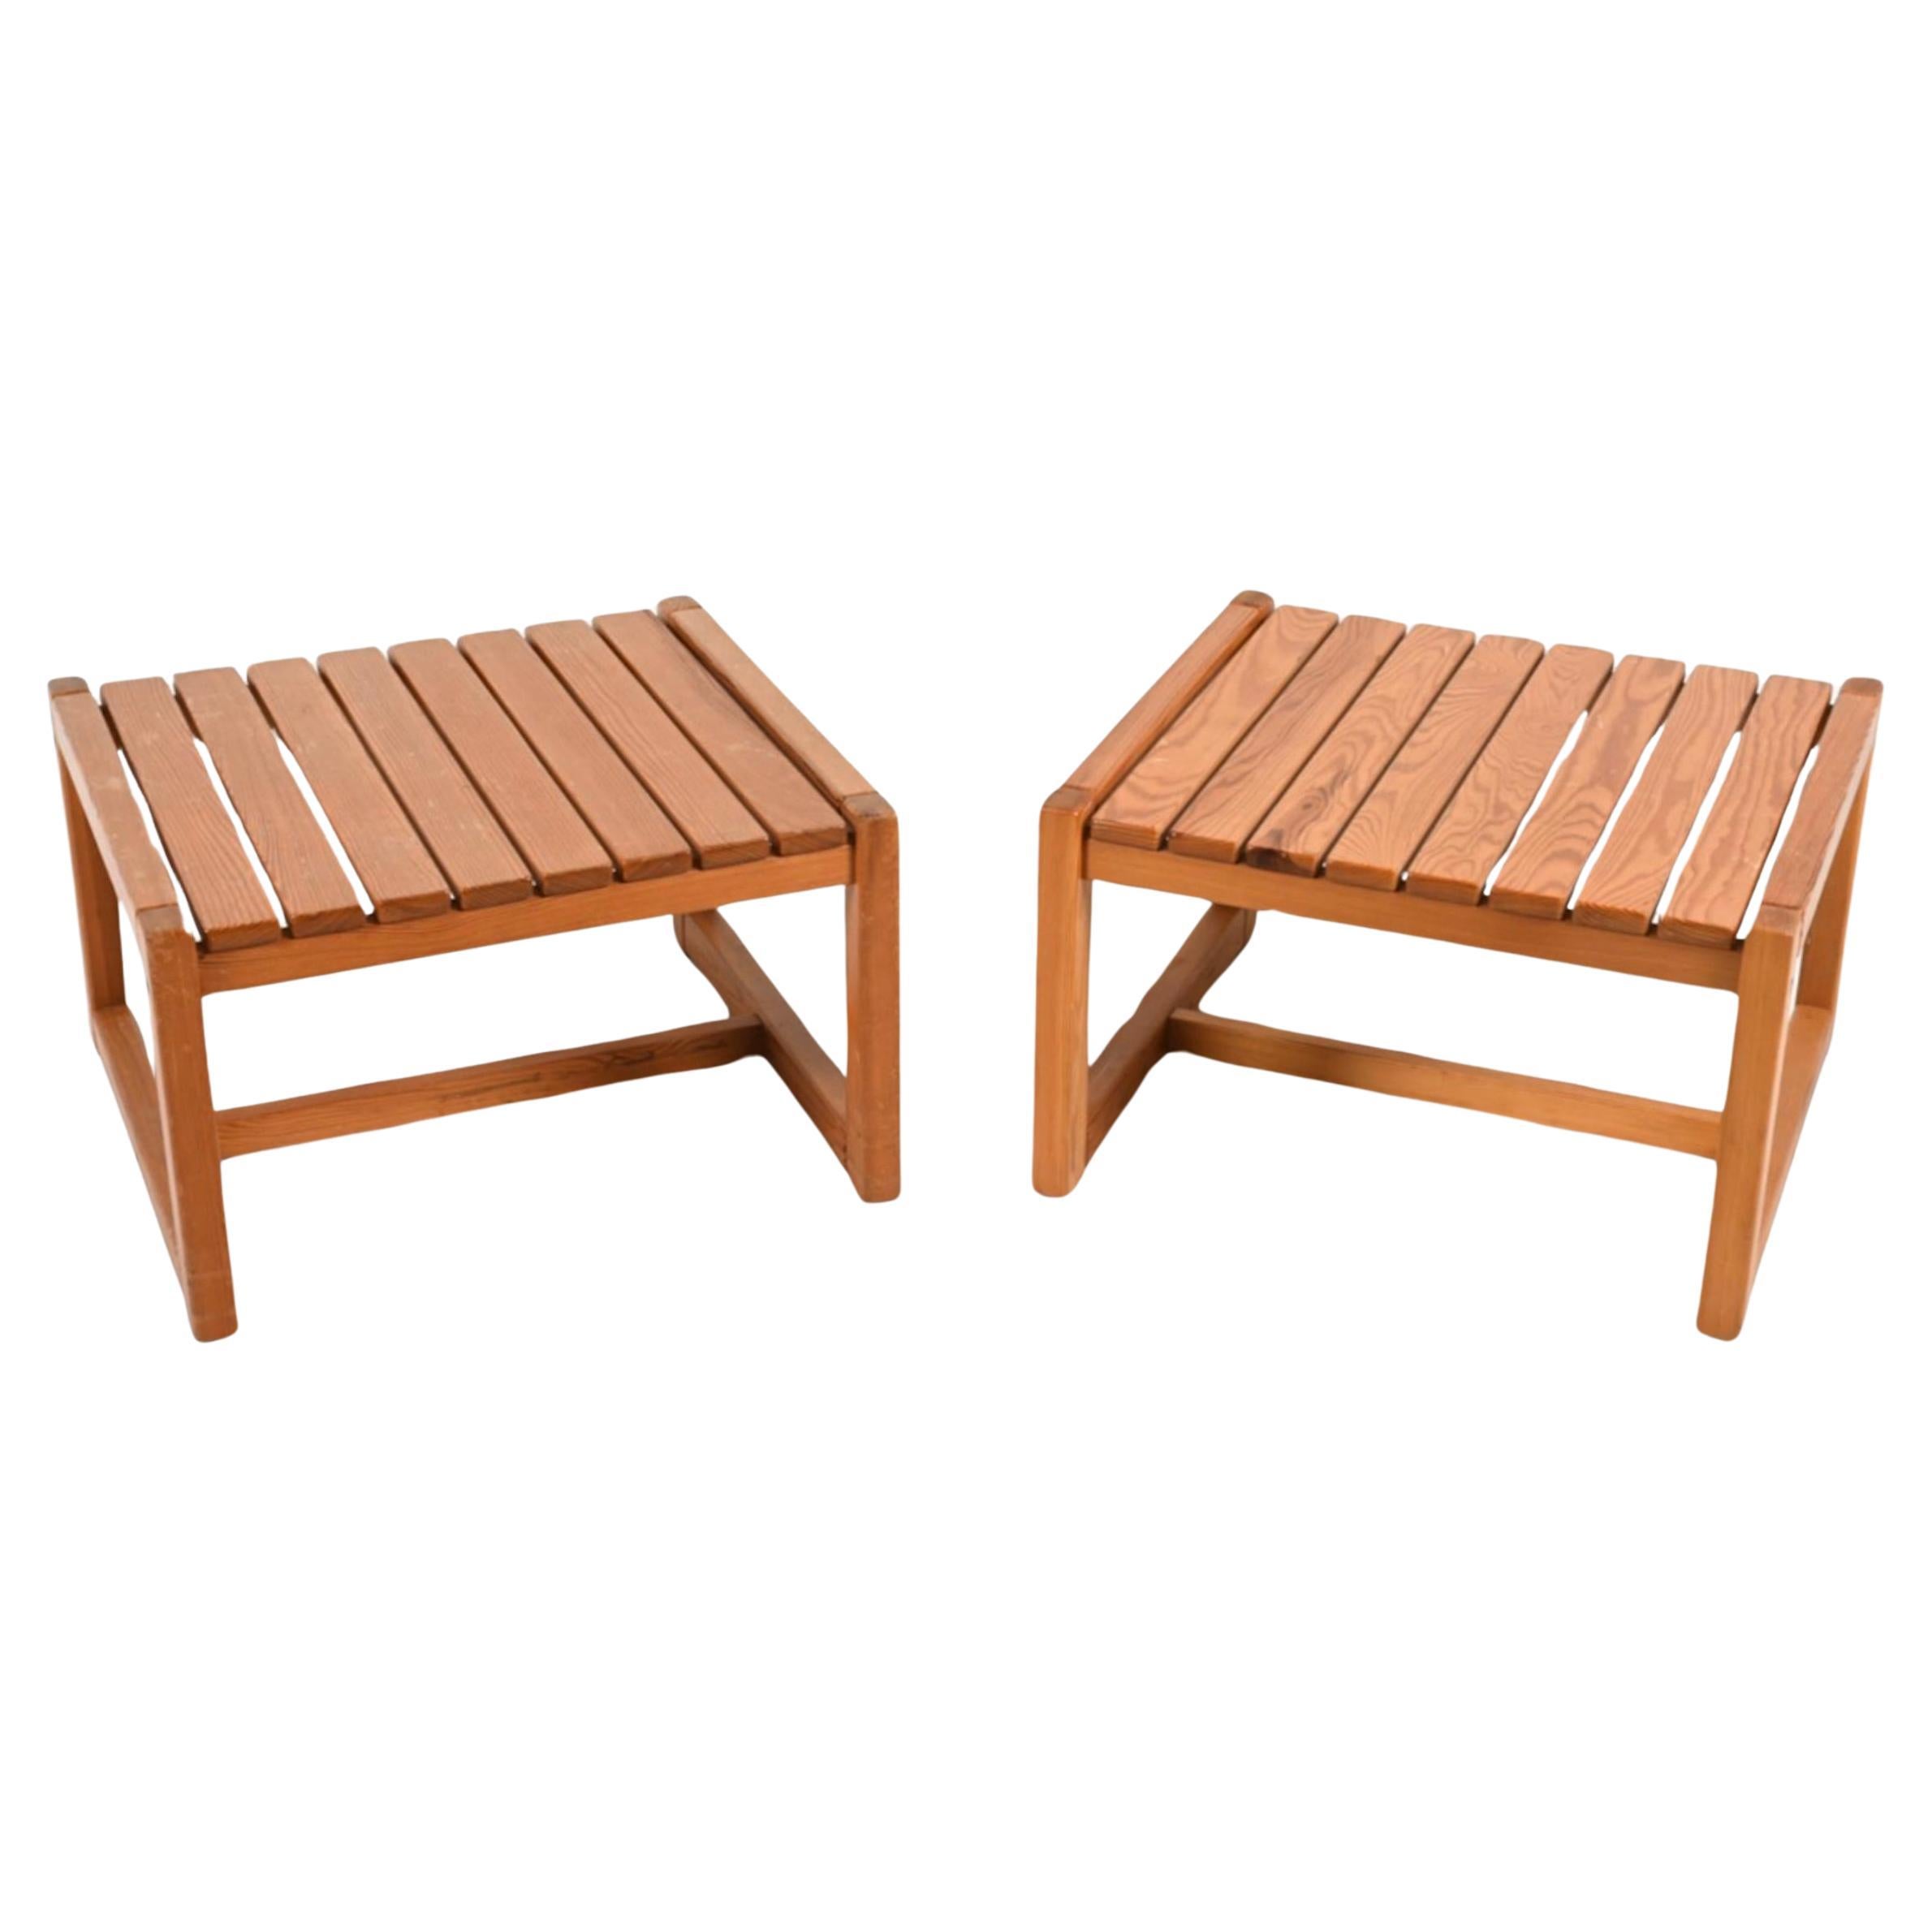 Pair of Dutch Modern low End side tables or Nightstands in solid slatted pine For Sale